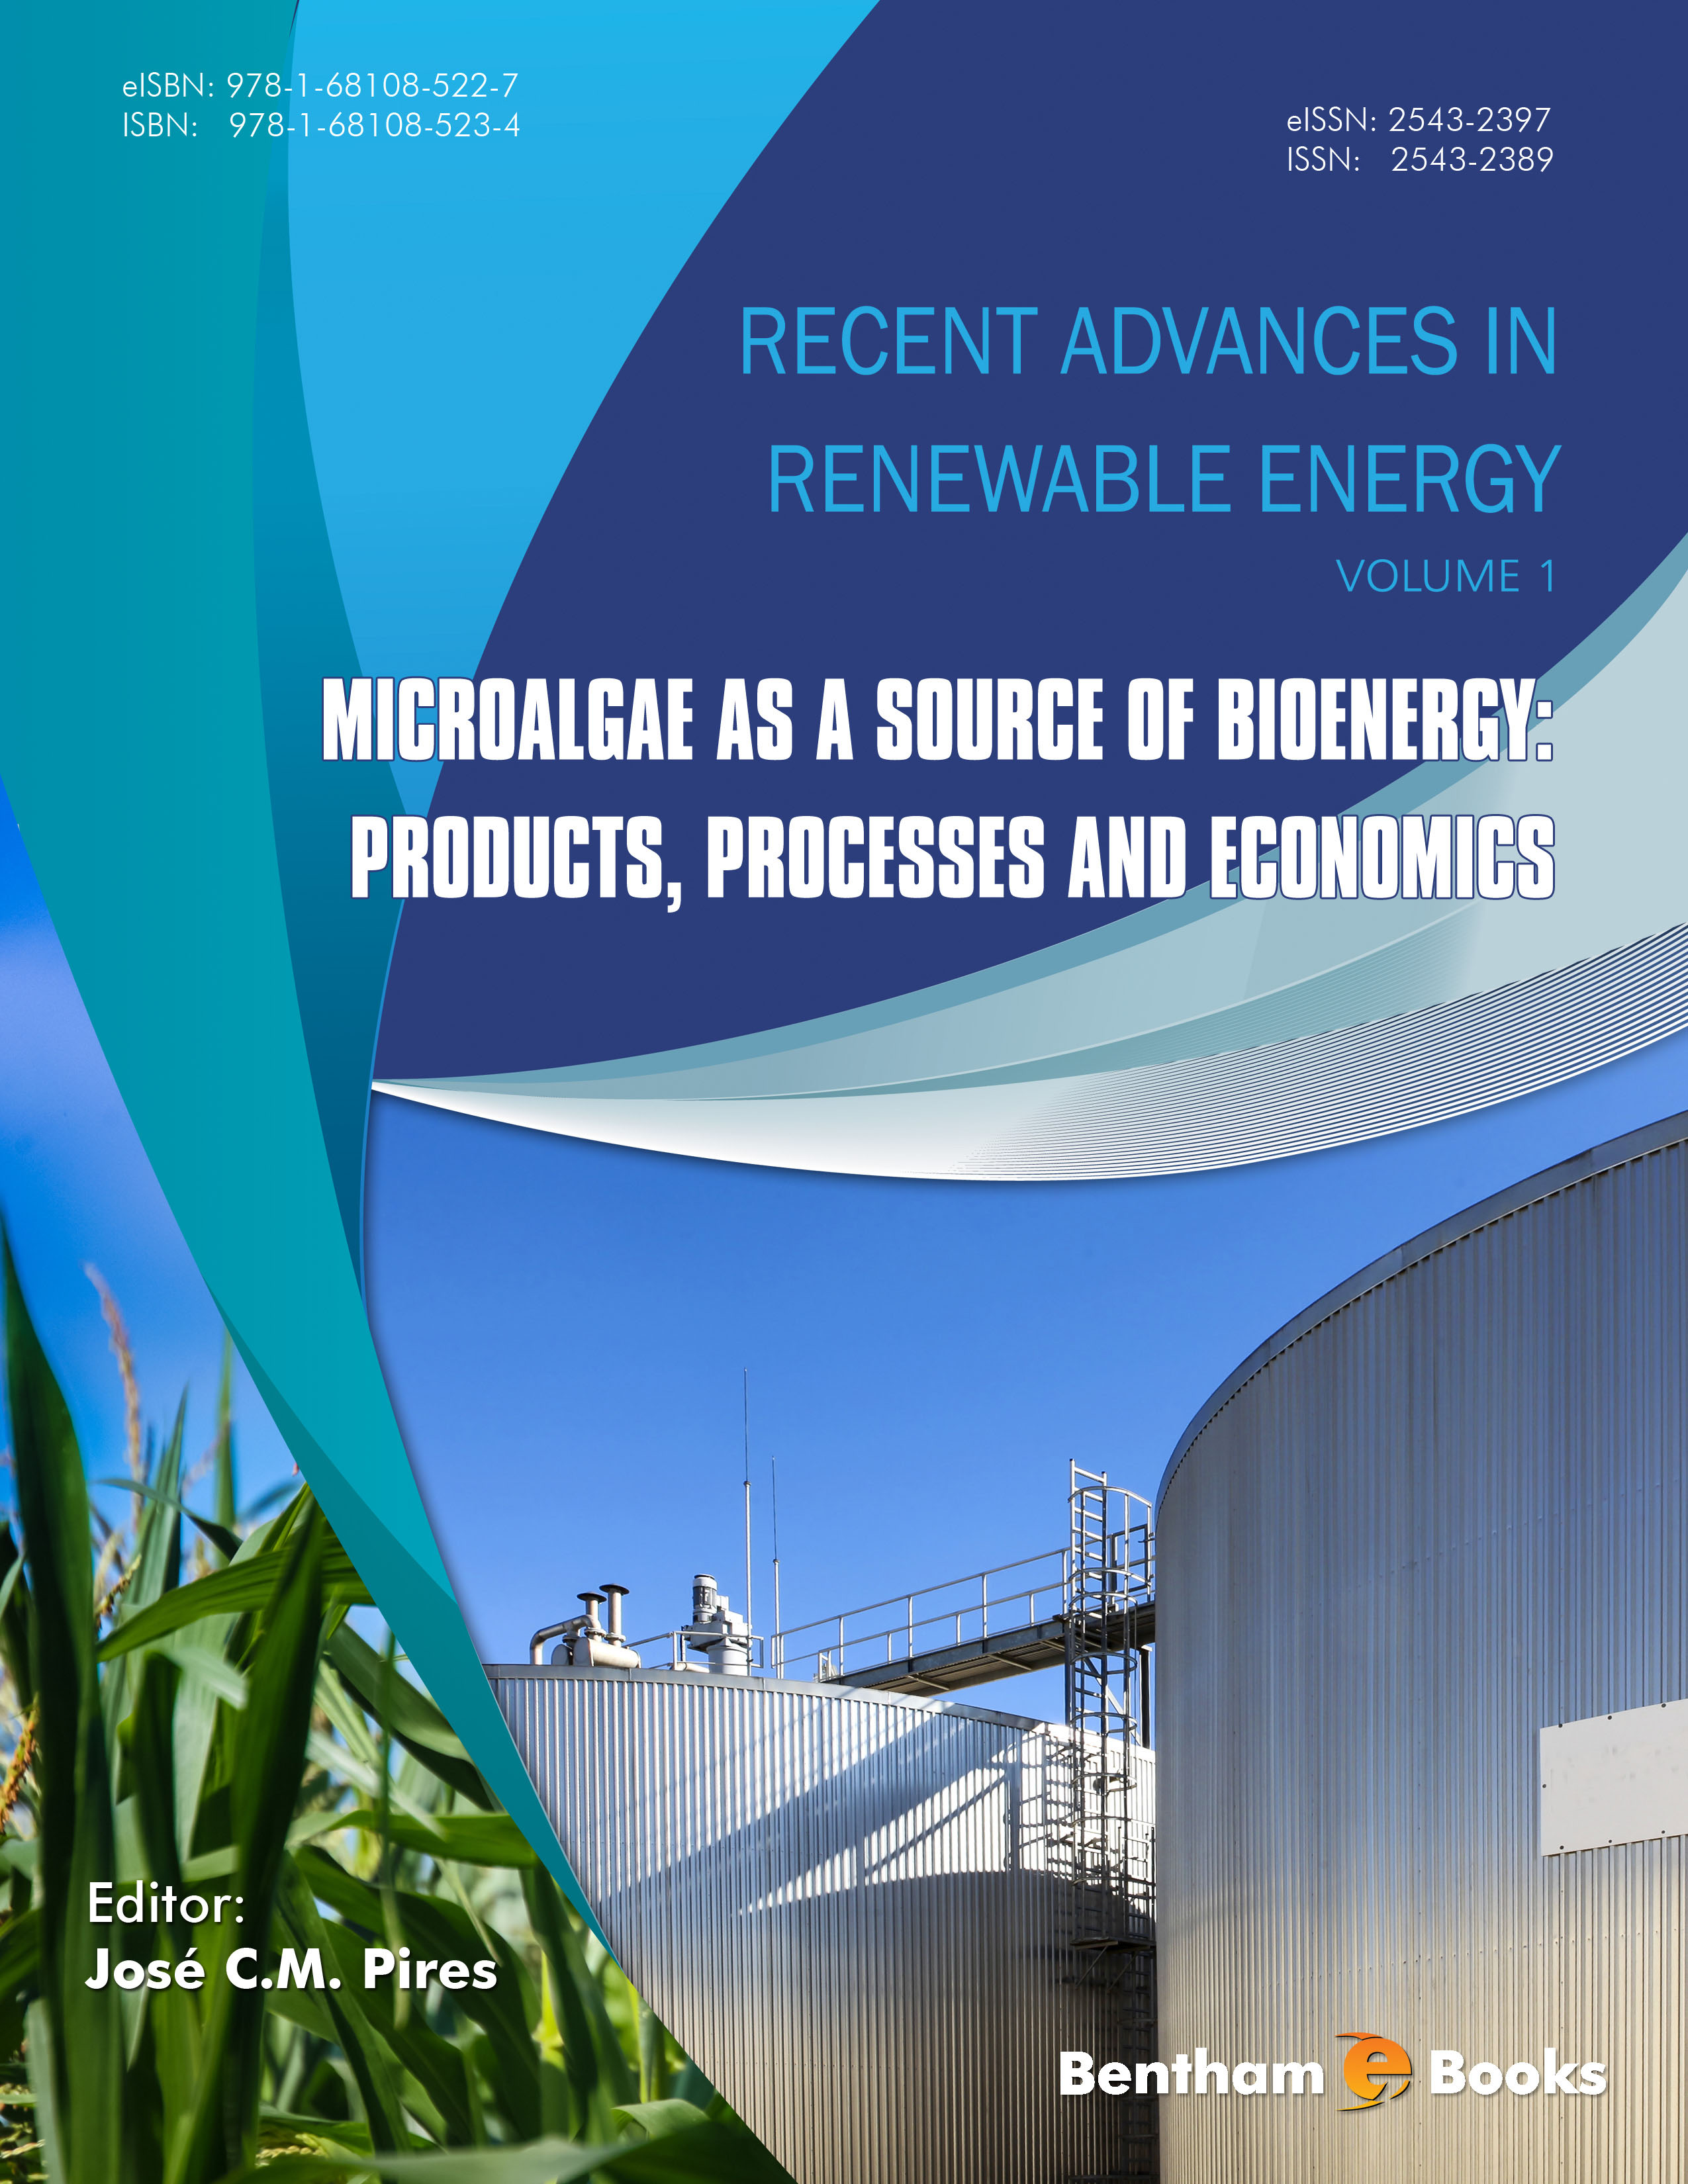 Microalgae as a Source of Bioenergy: Products, Processes and Economics